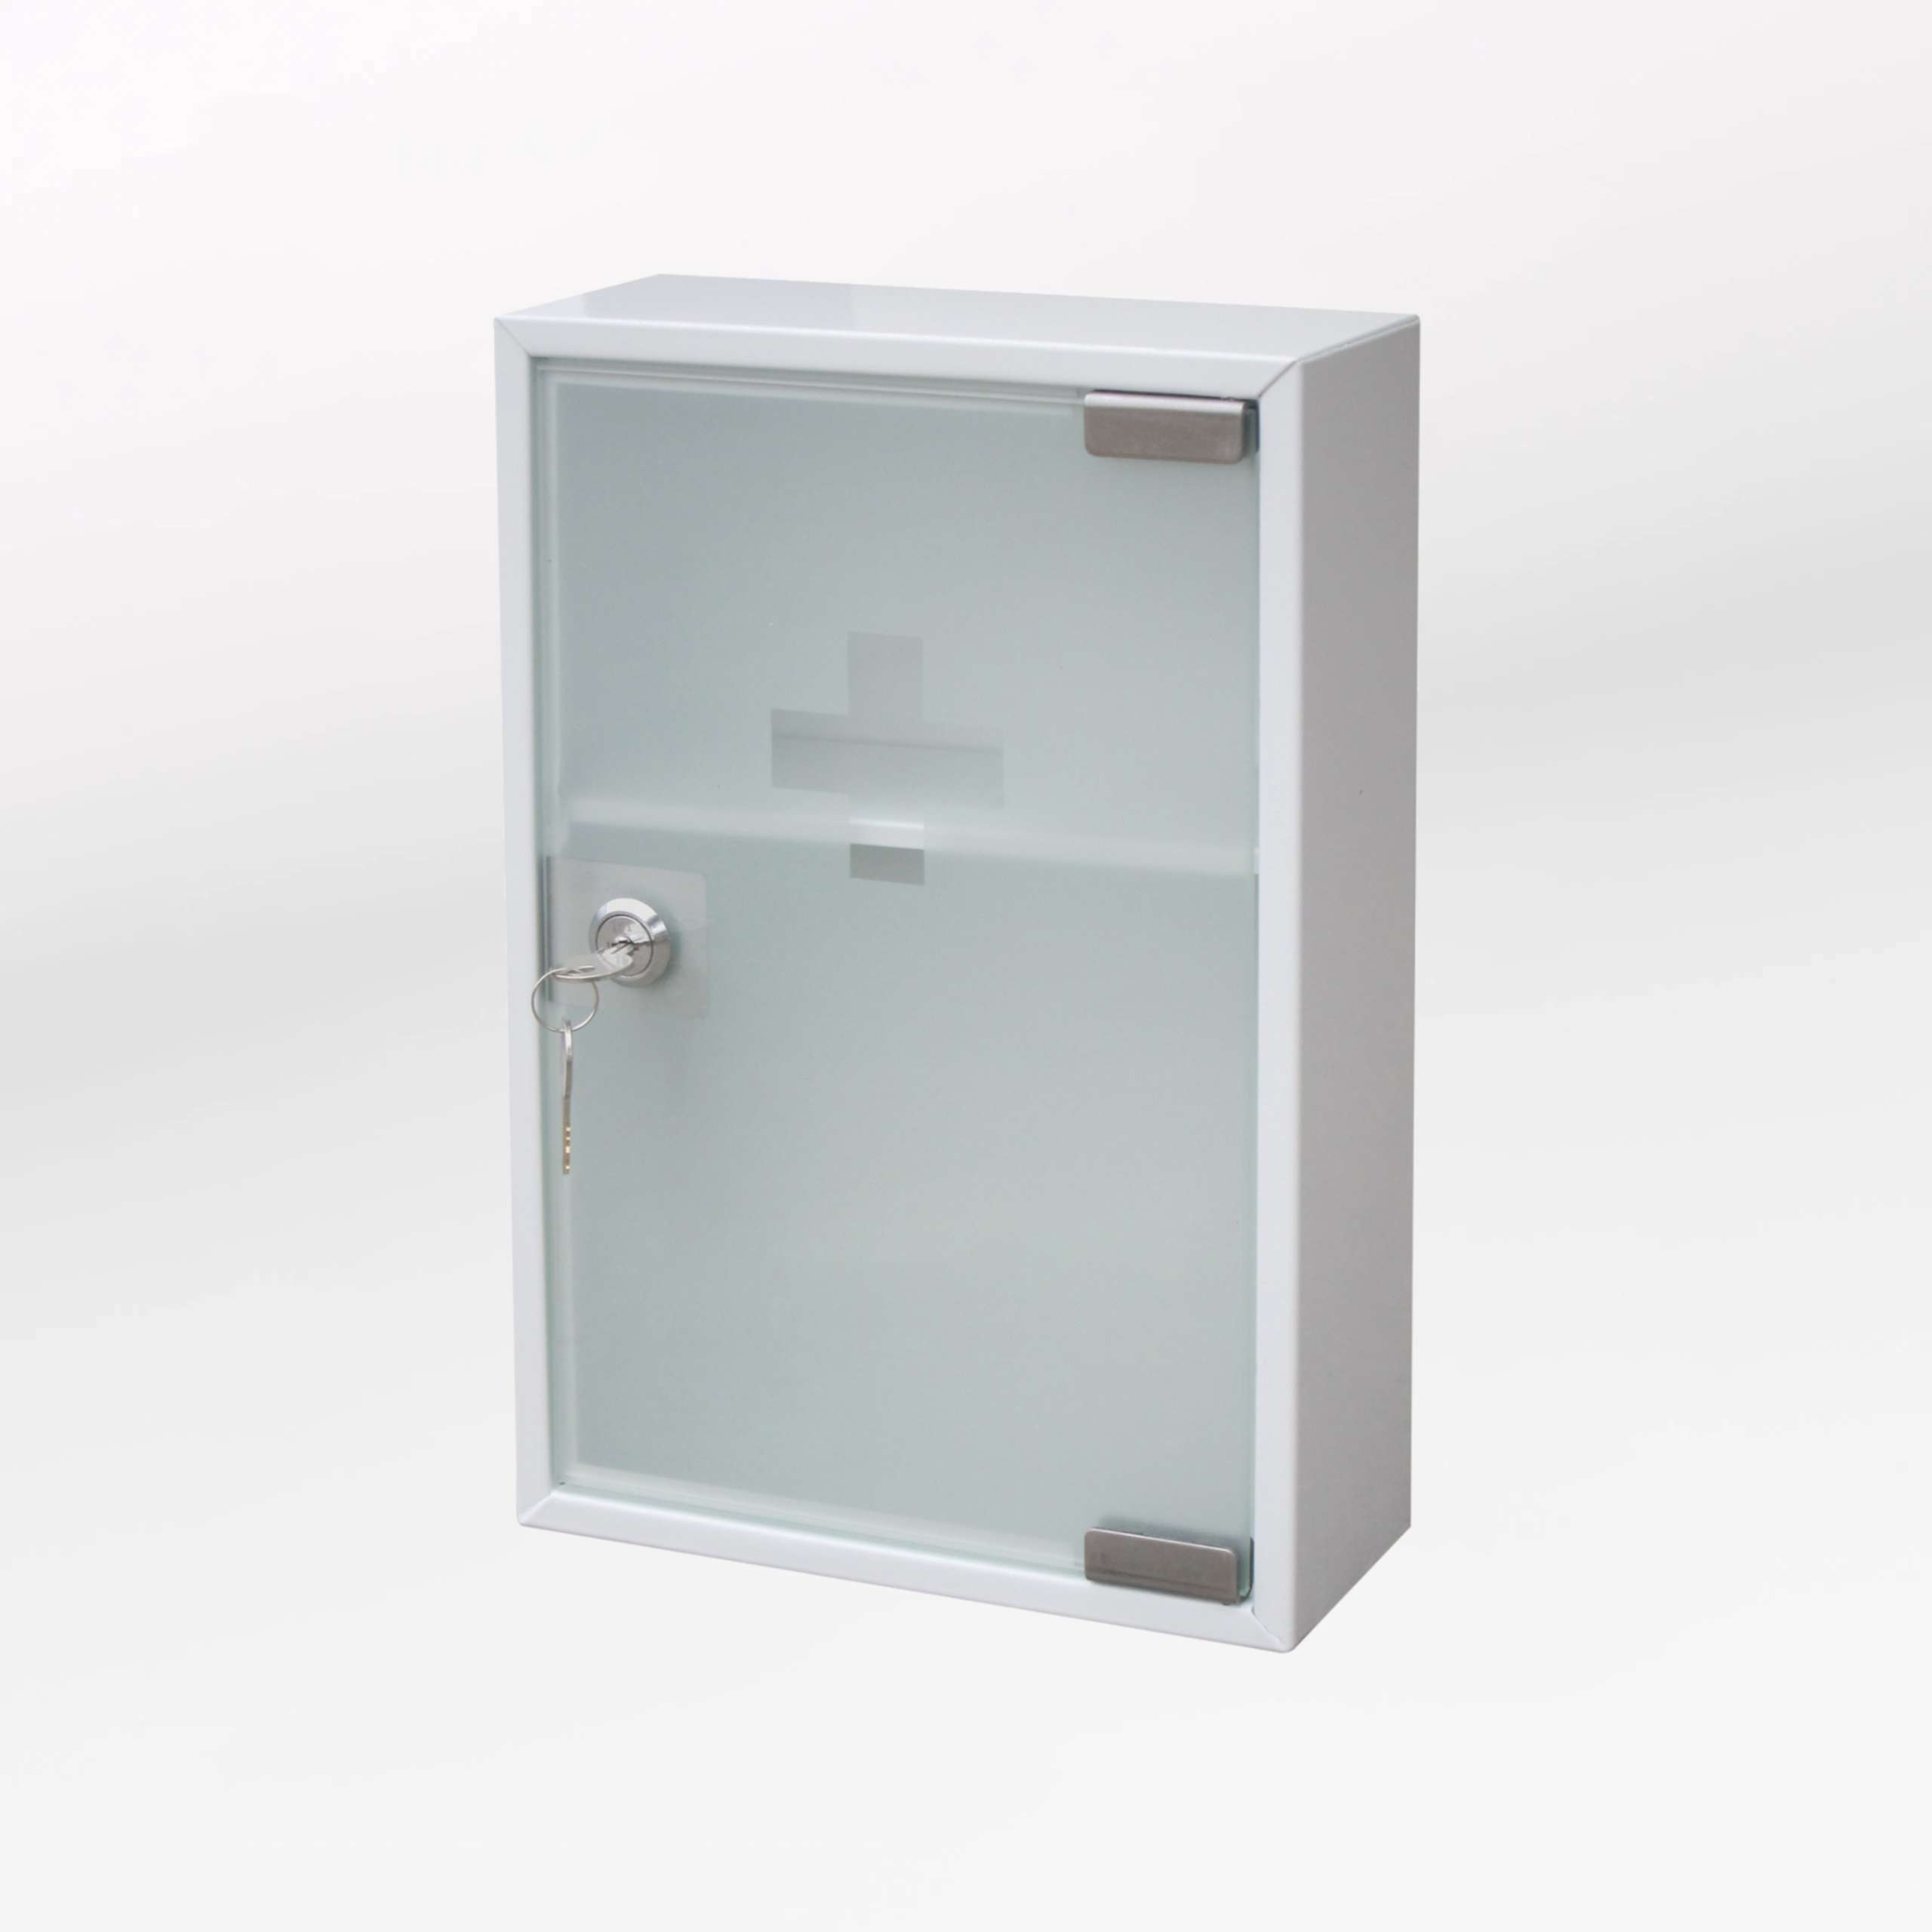 Glass door First Aid Cabinets